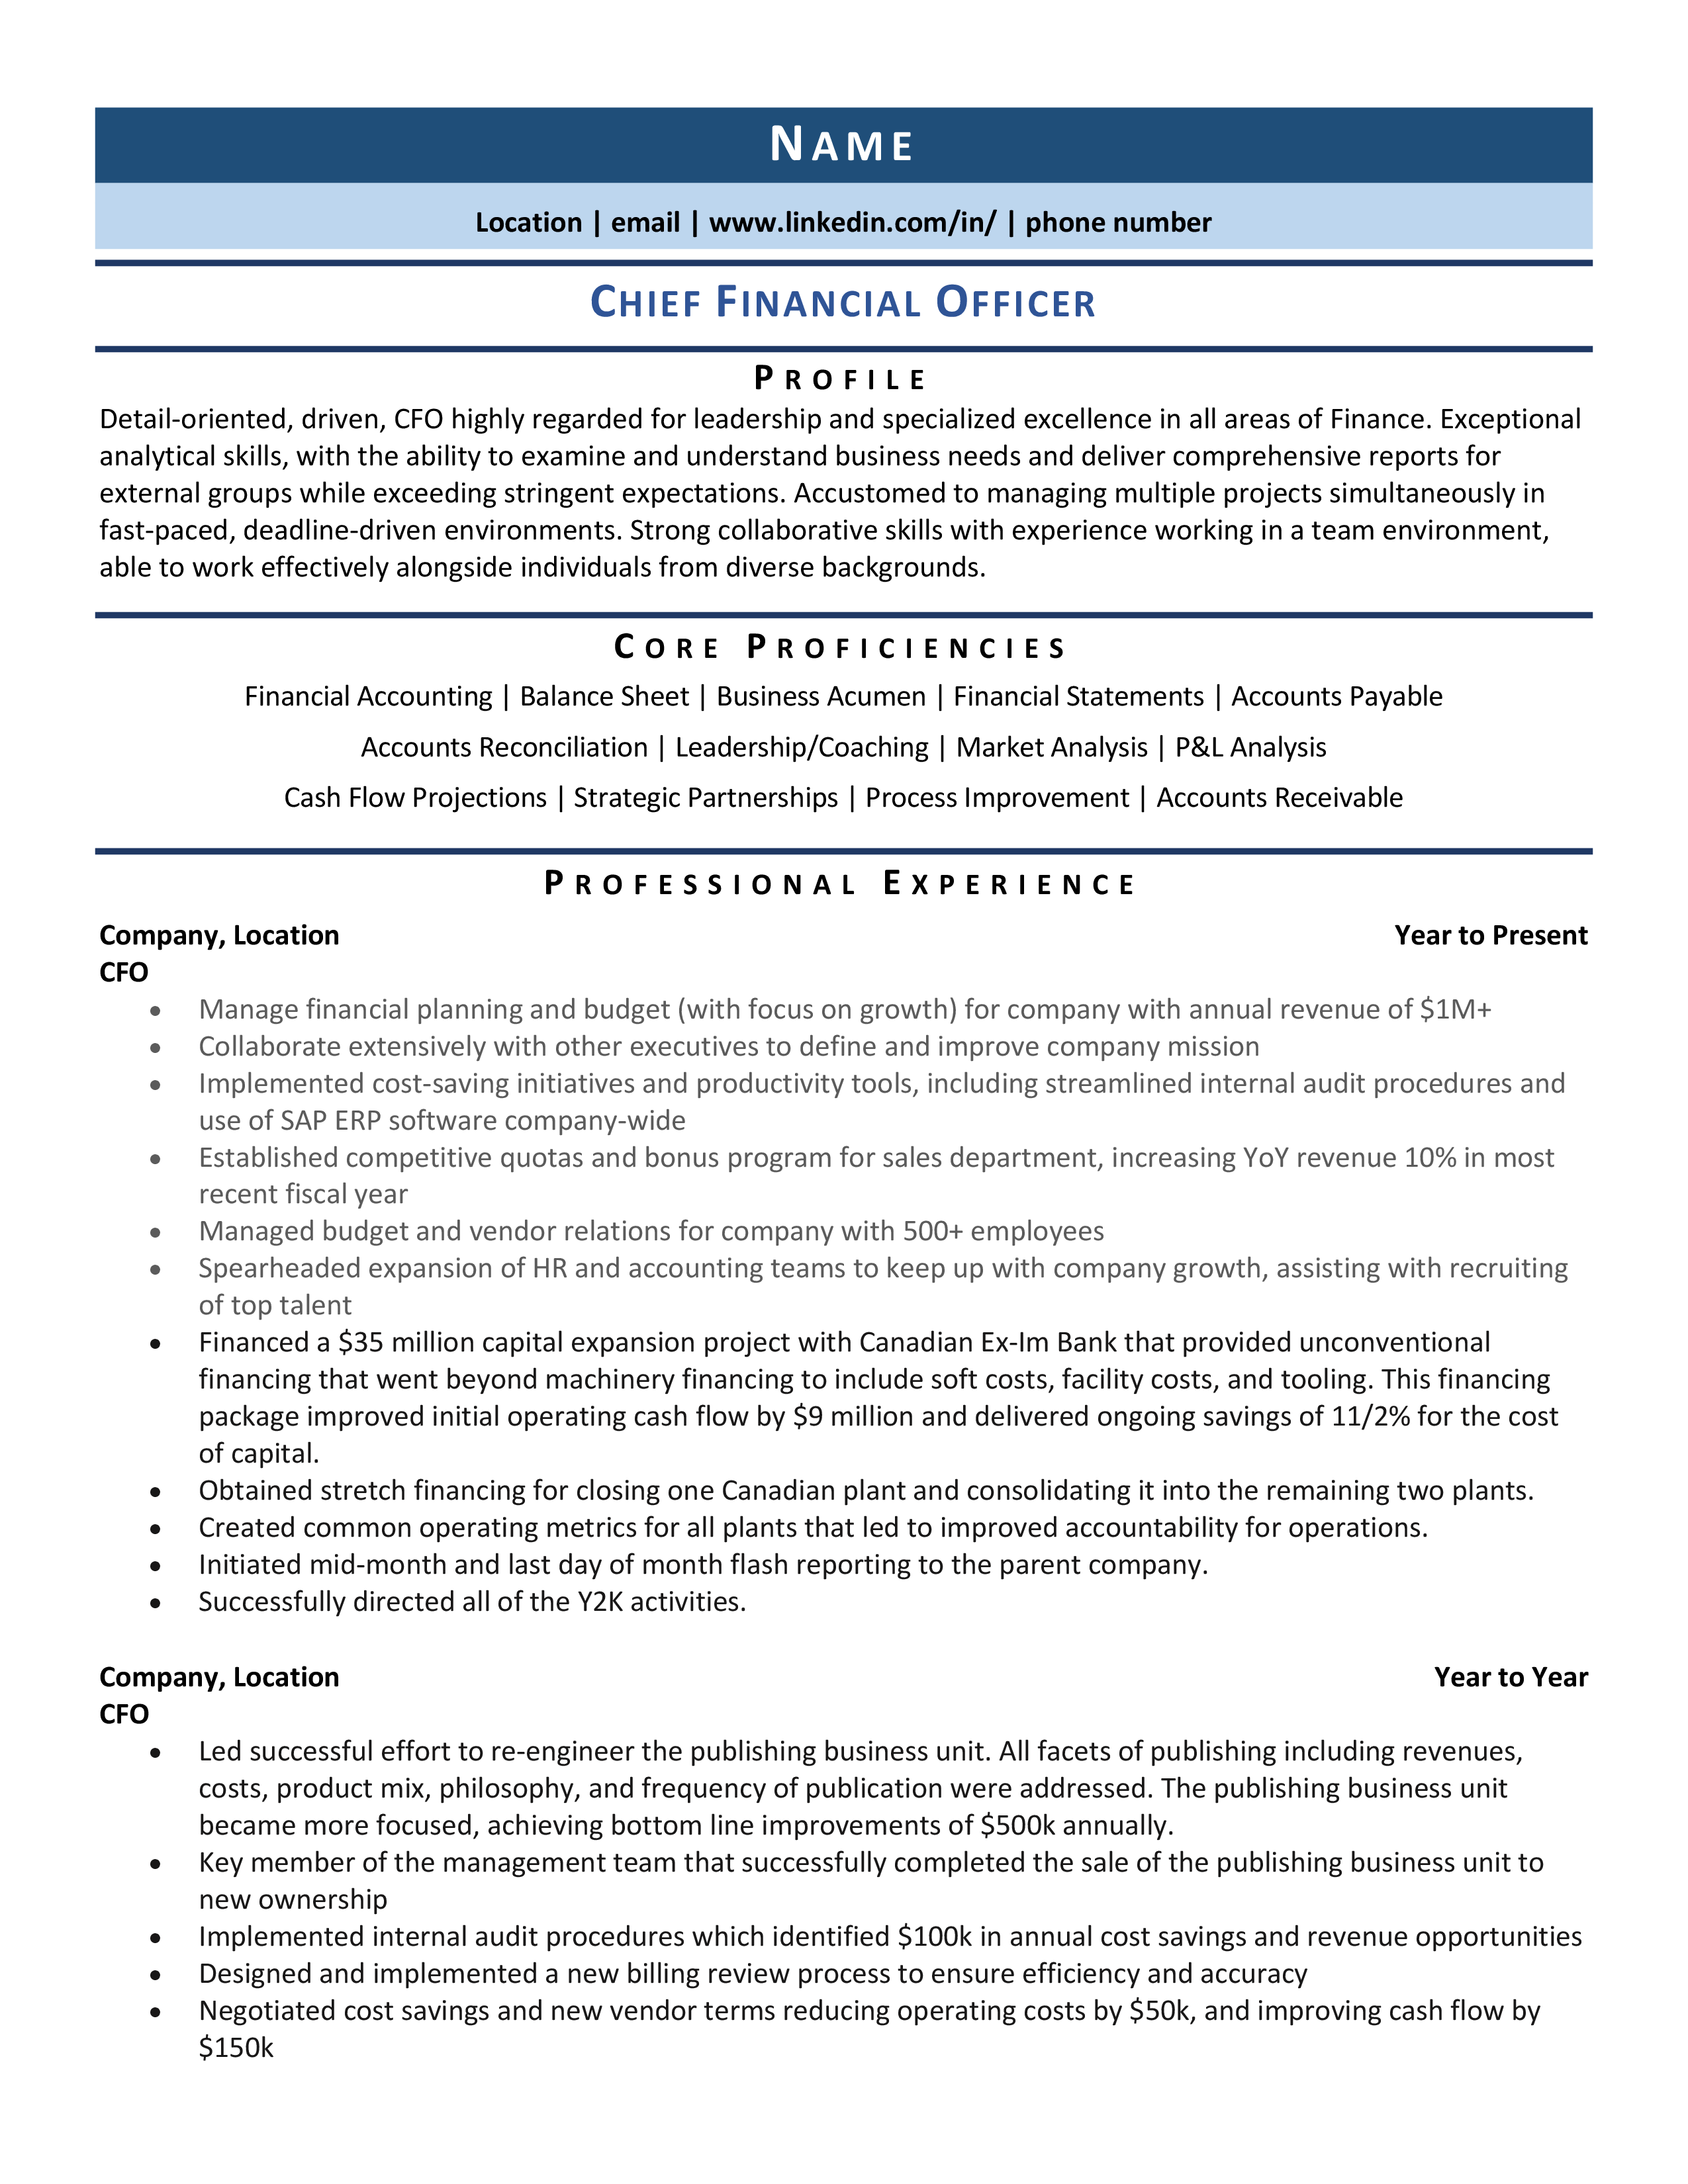 Accounting Resume Examples | Resume Professional Writers